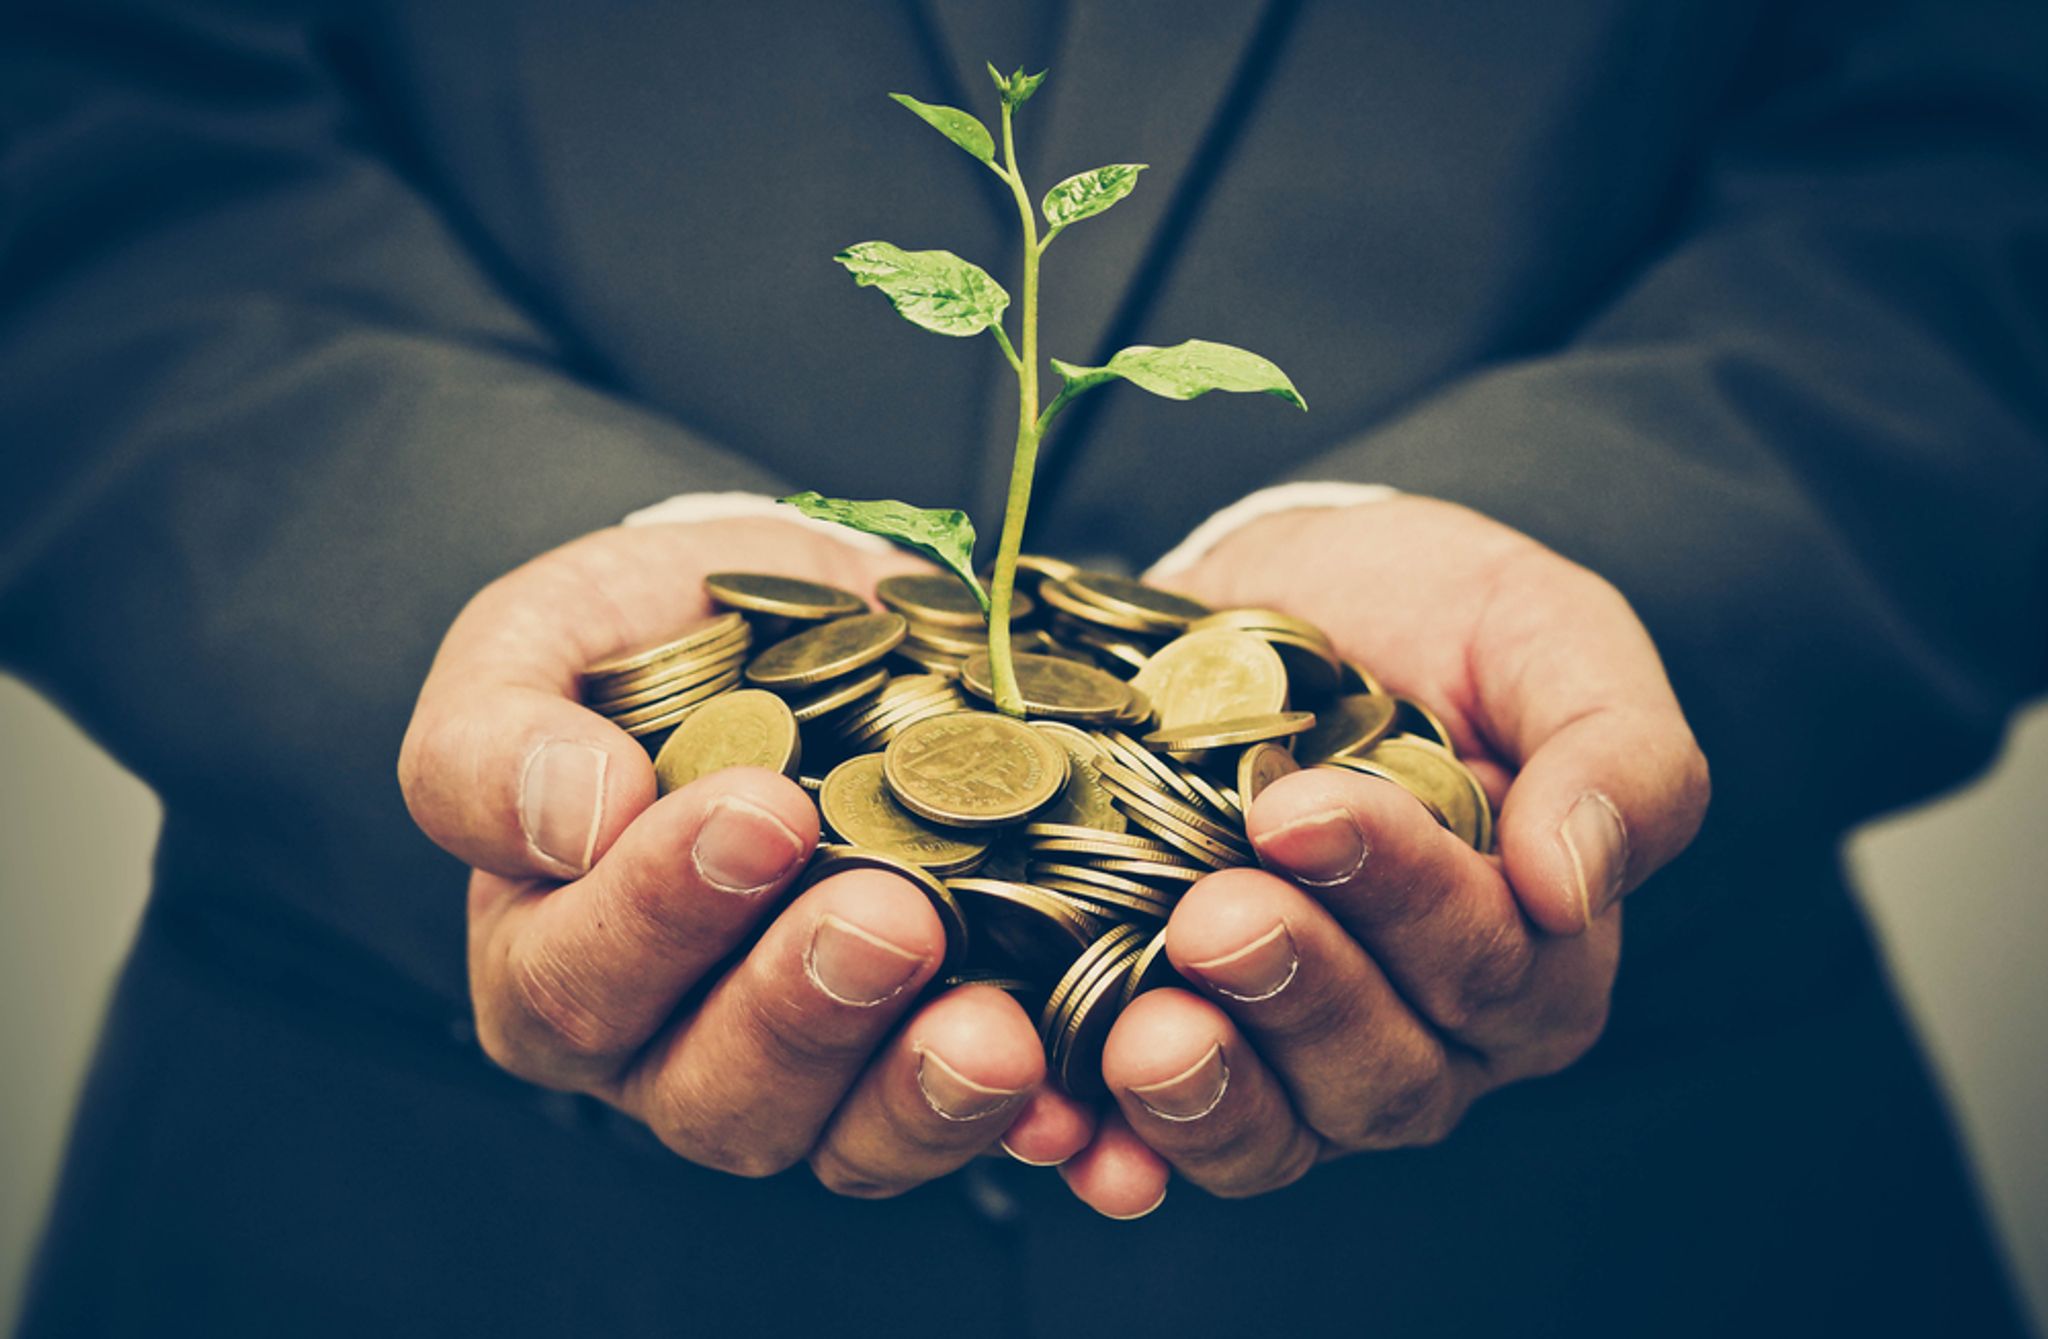 A photo of someone holding a pile of coins with a plant shoot coming out from the centre